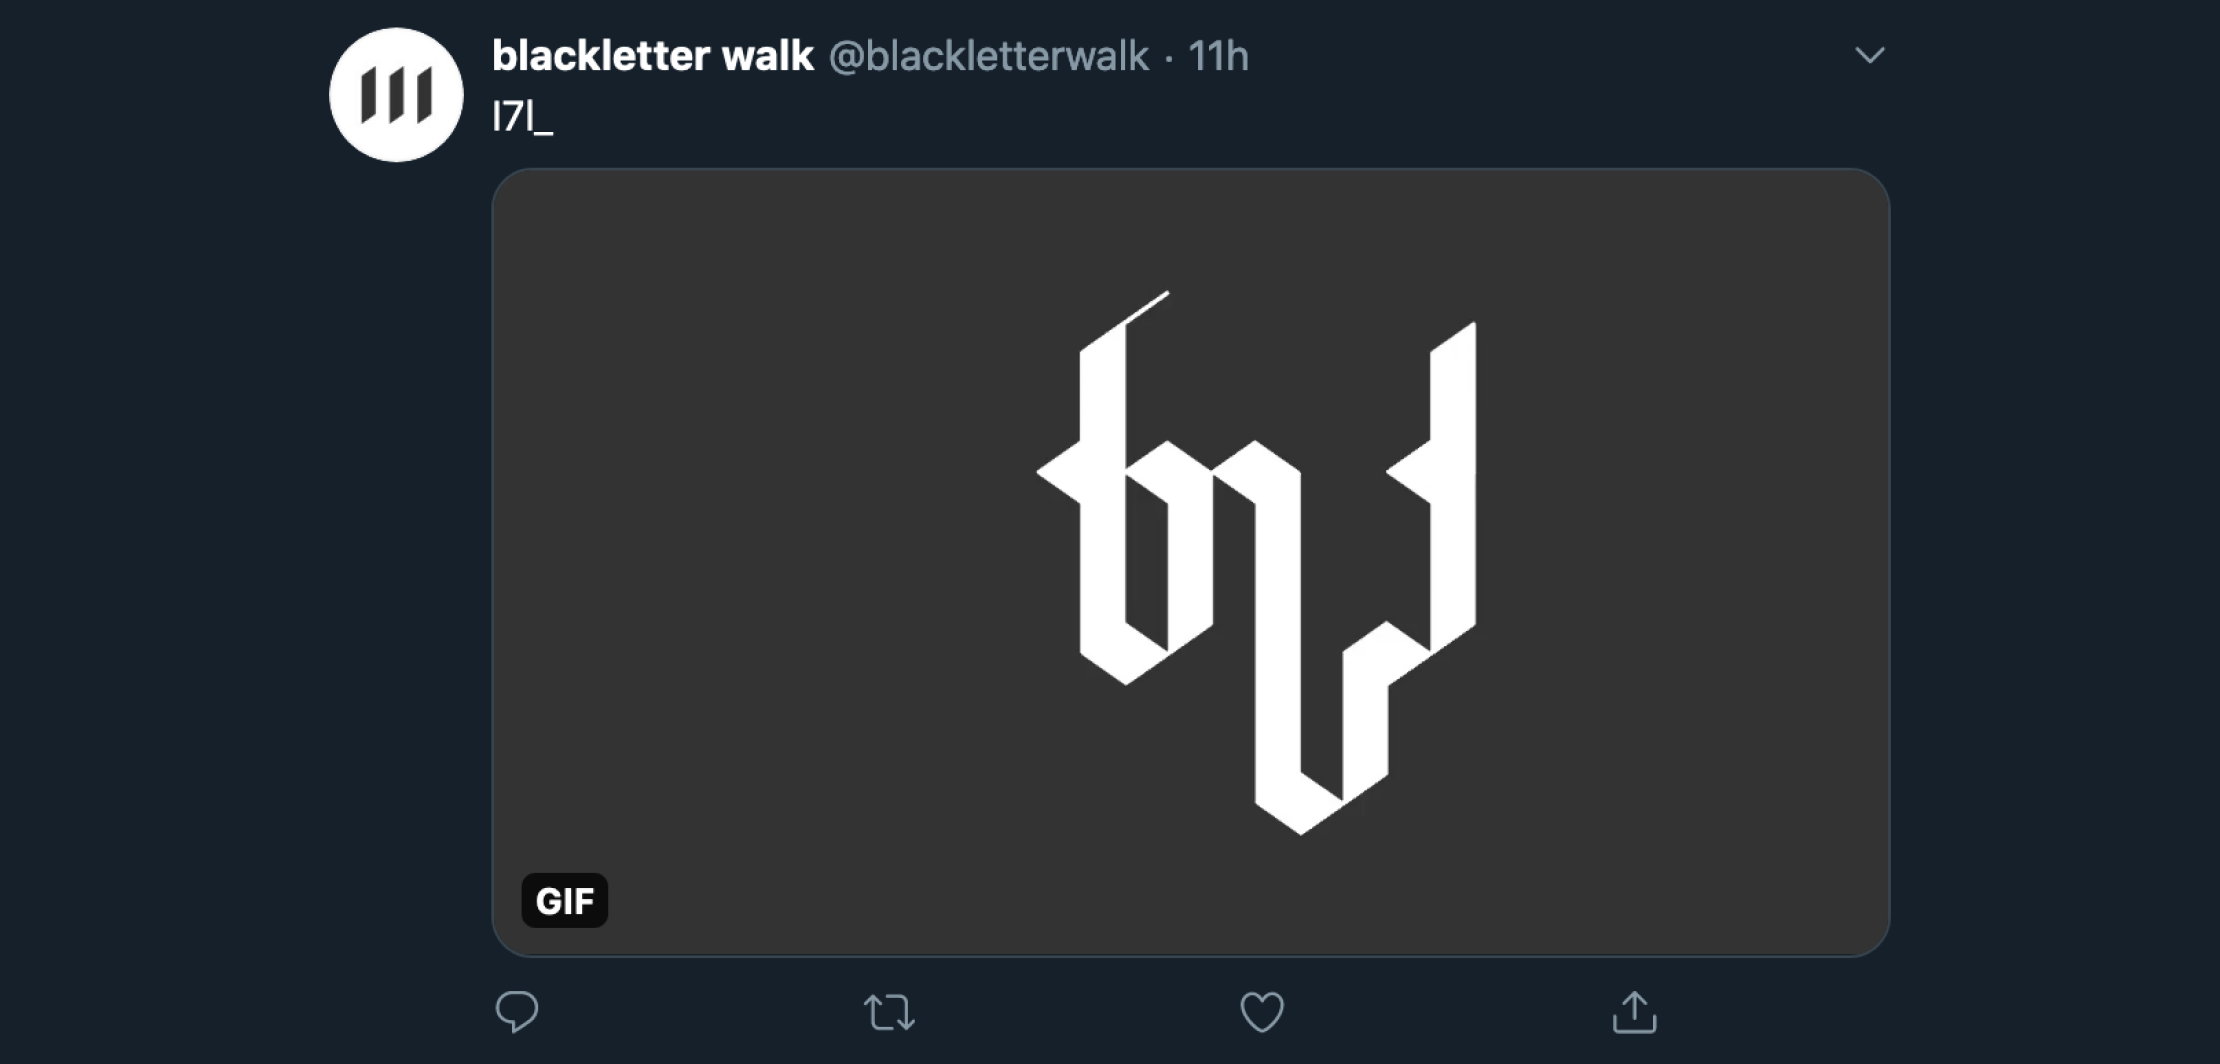 A single frame from a Blackletter Walk gif